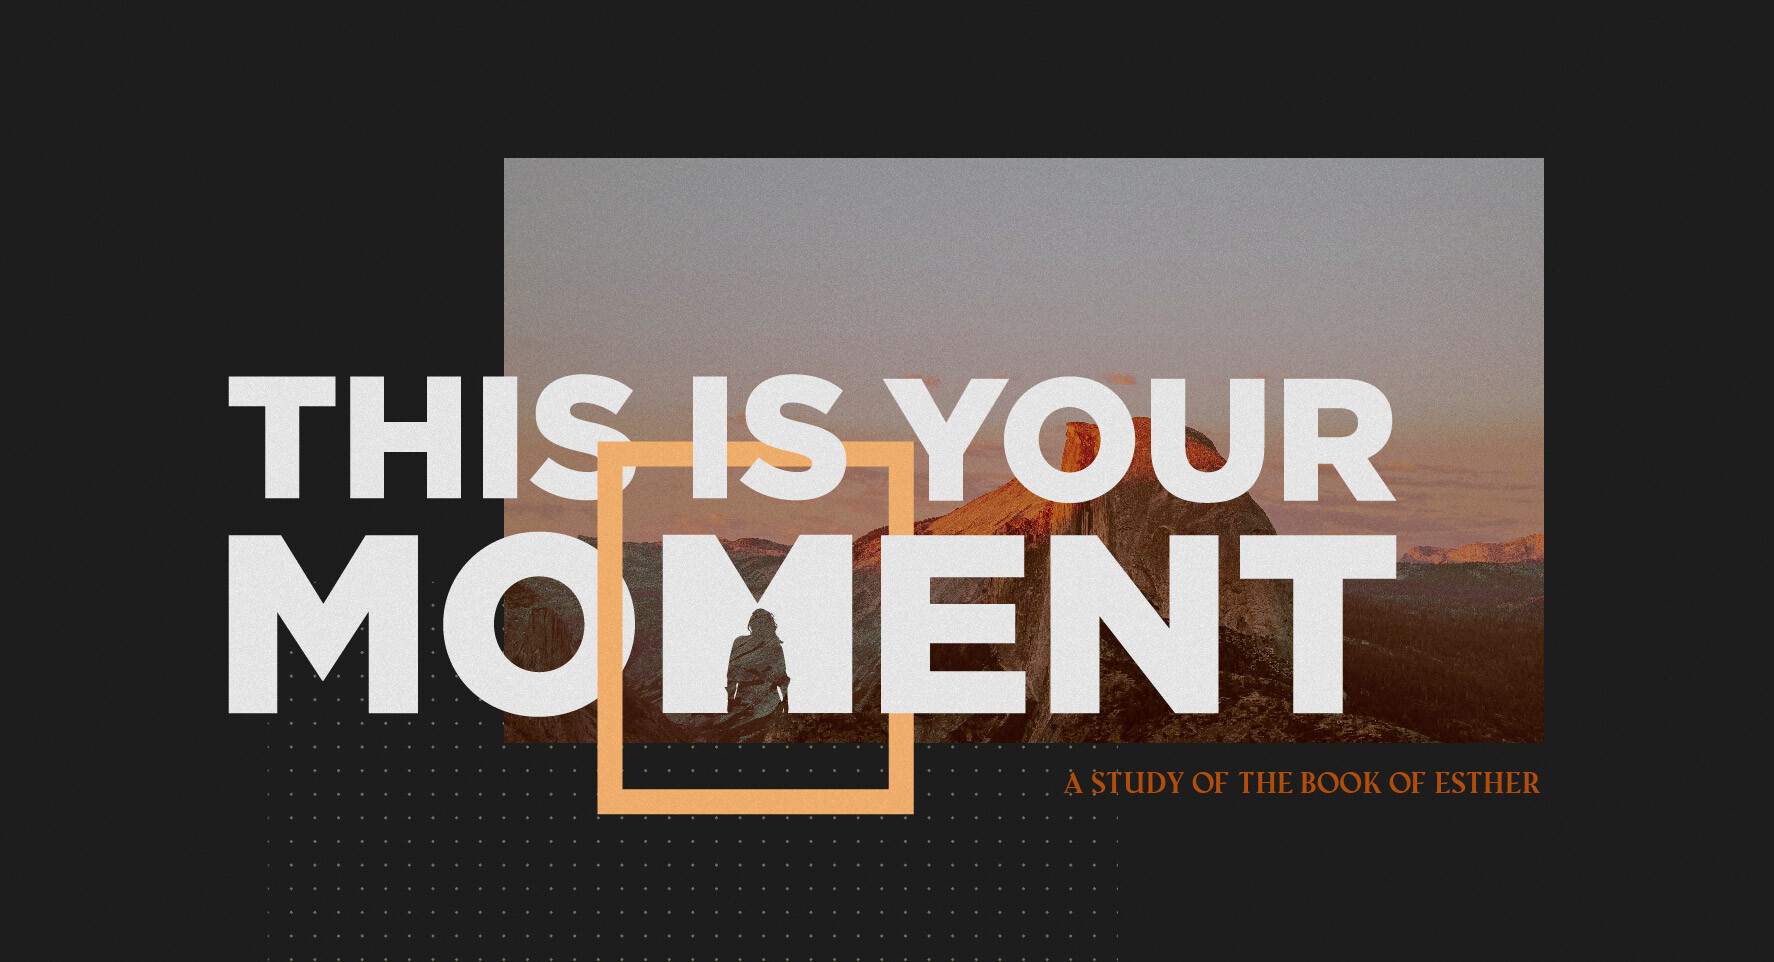 This is Your Moment